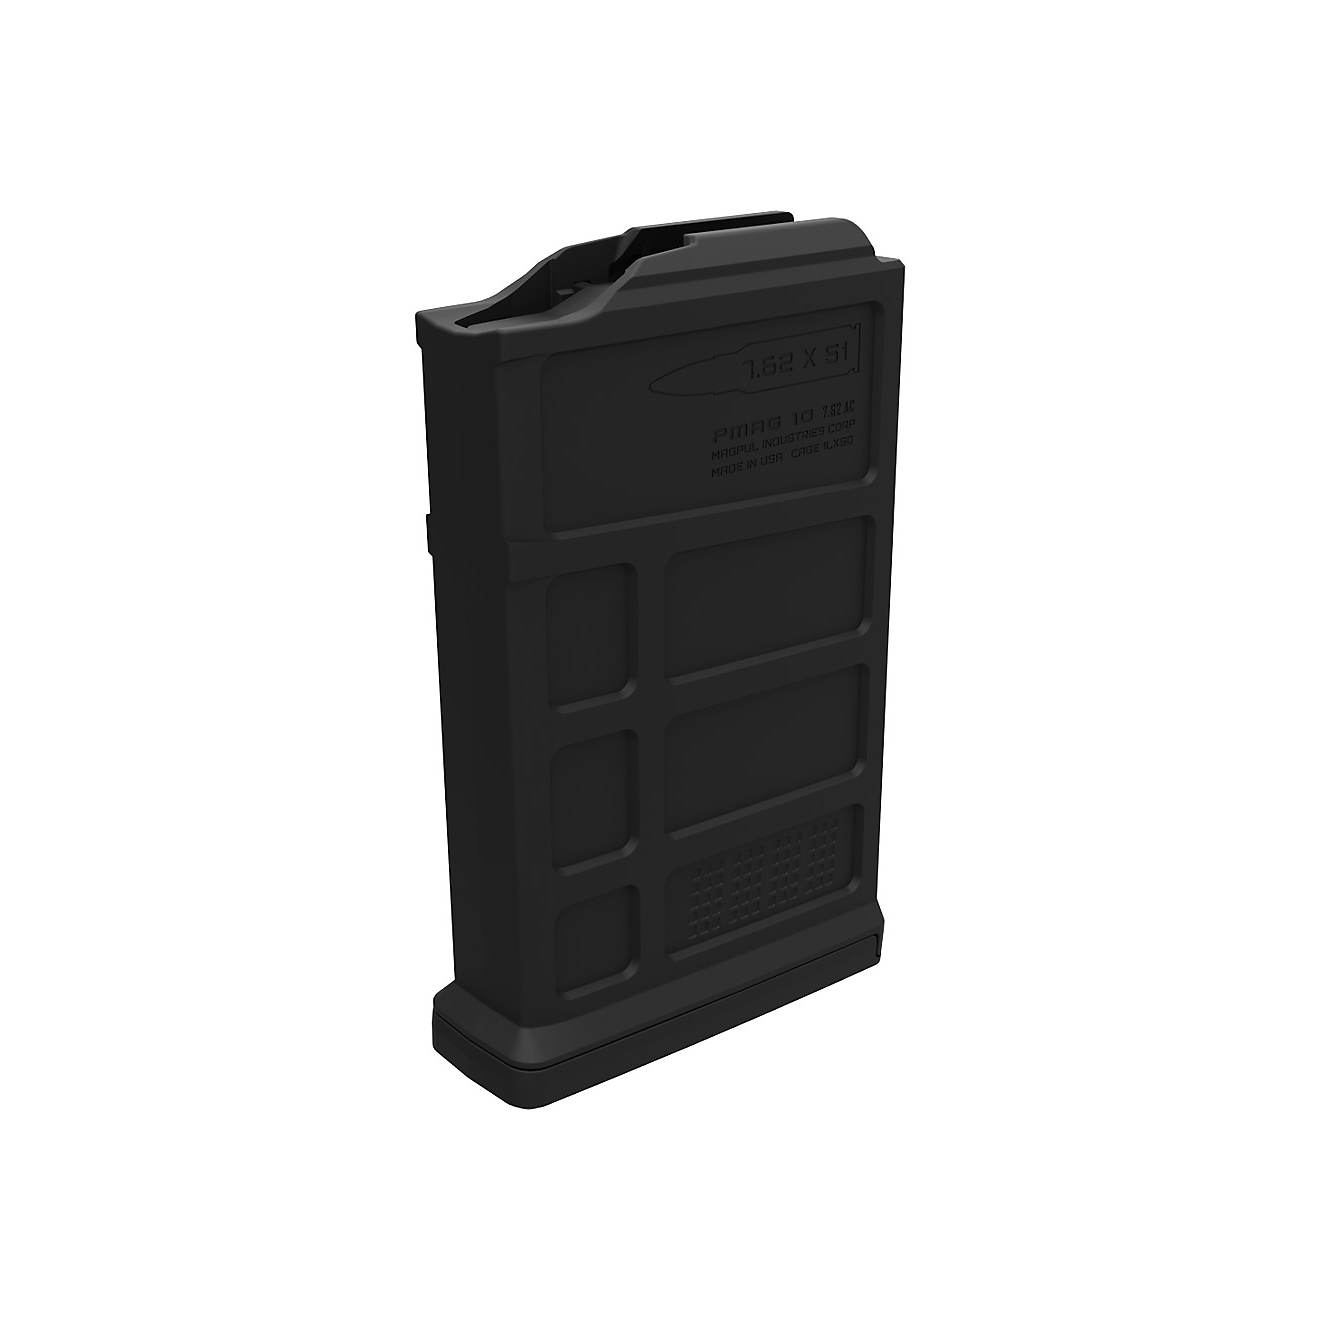 Magpul PMAG 10 7.62 AC AICS Short Action 7.62 x 51mm NATO Magazine                                                               - view number 1